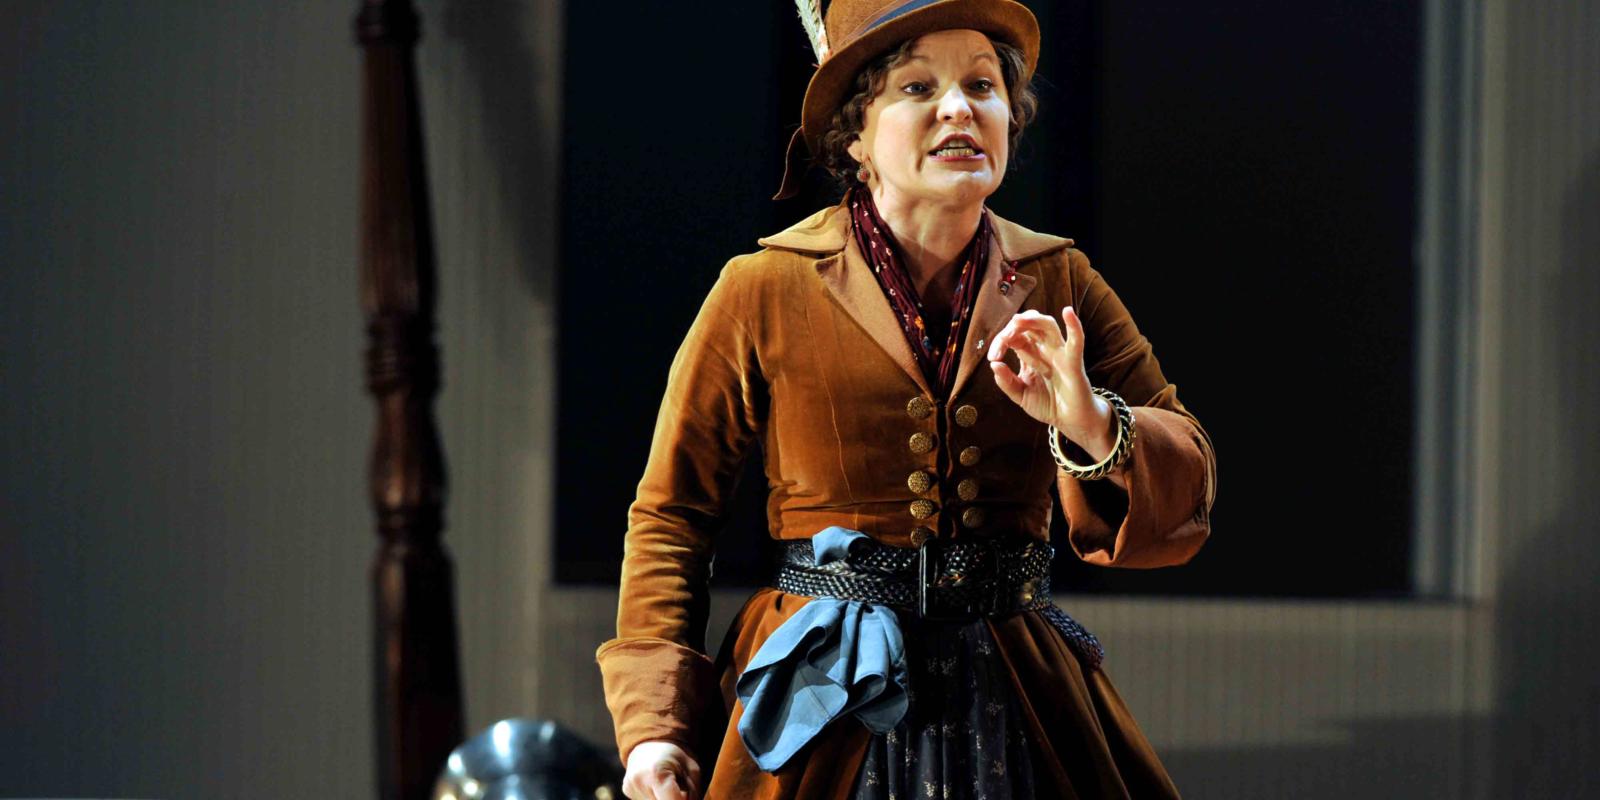 An image of Lucy Schaufer in Fiona Shaw's 2014 production The Marriage of Figaro